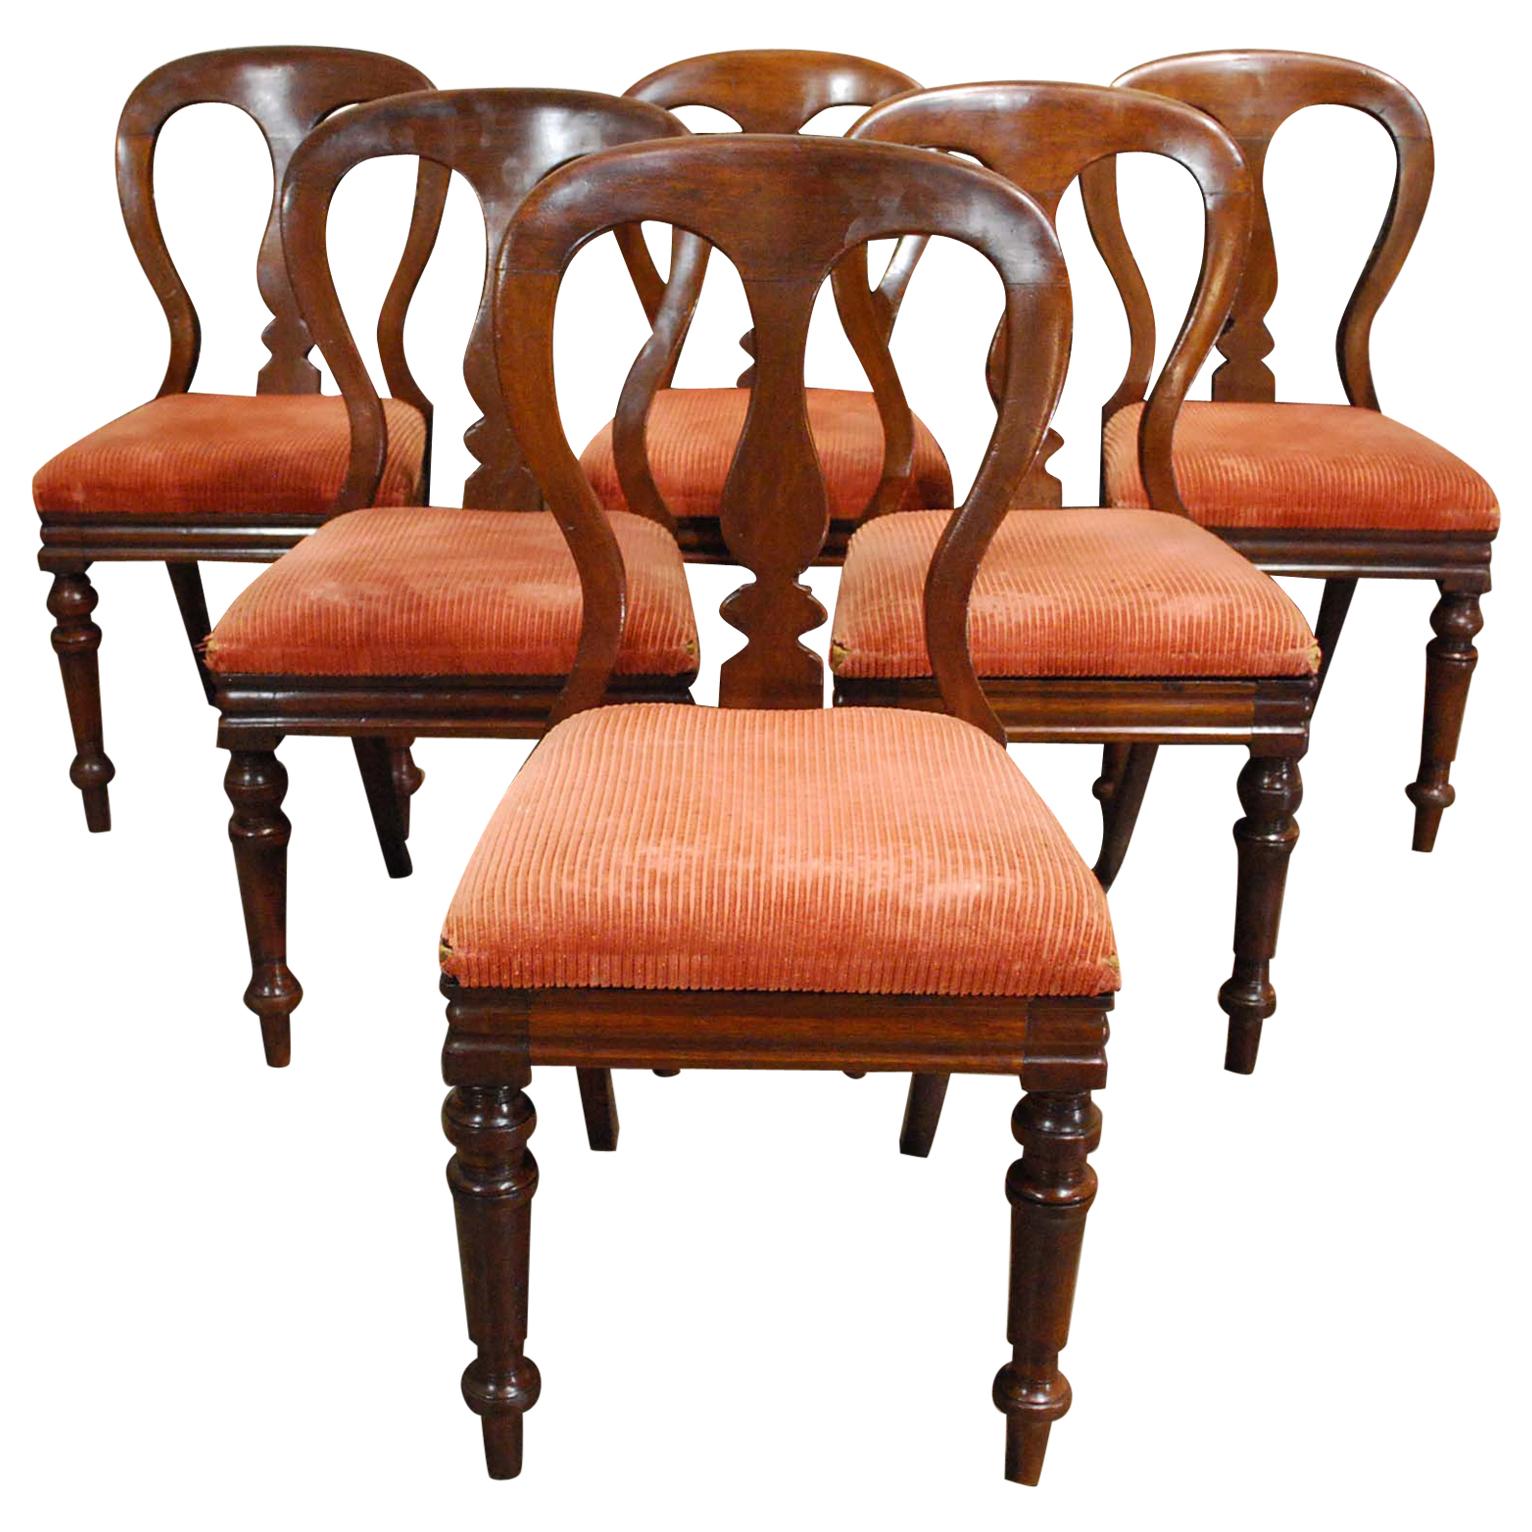 19th Century Set of 6 English Victorian Mahogany Dining Chairs by James Reilly